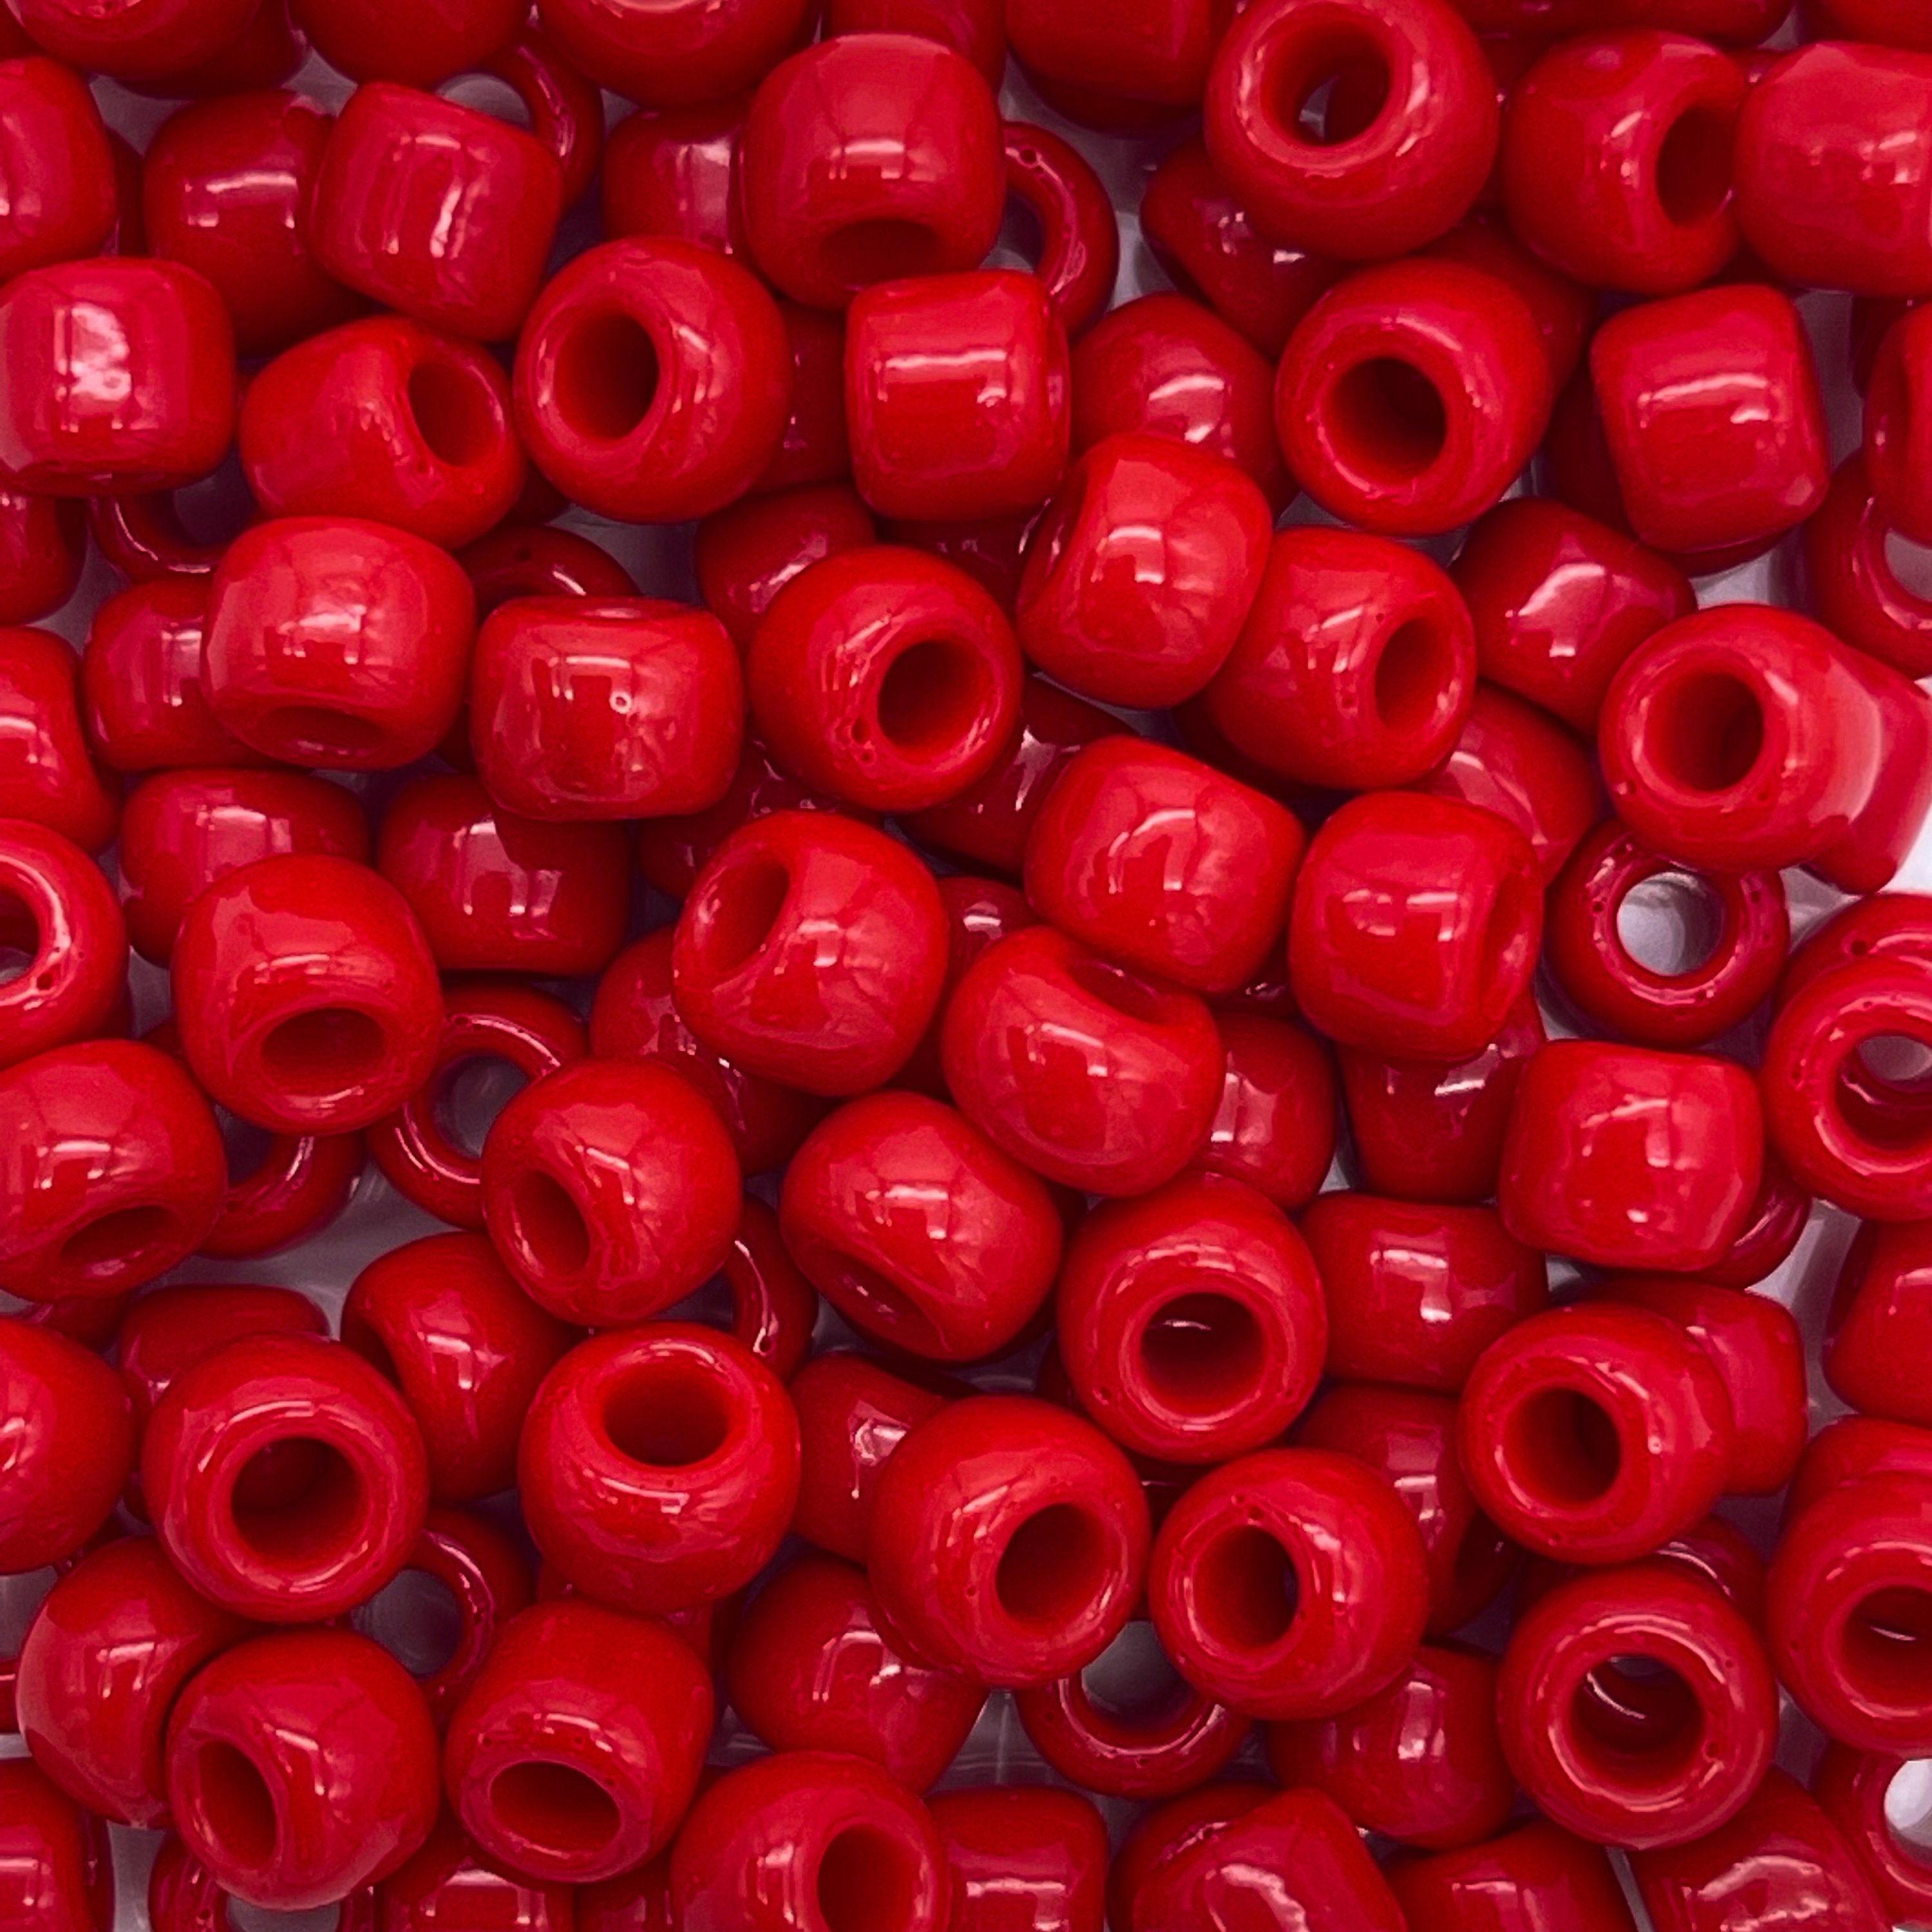 Japanese Glass Seed Beads Size 6/0-408 Opaque Red